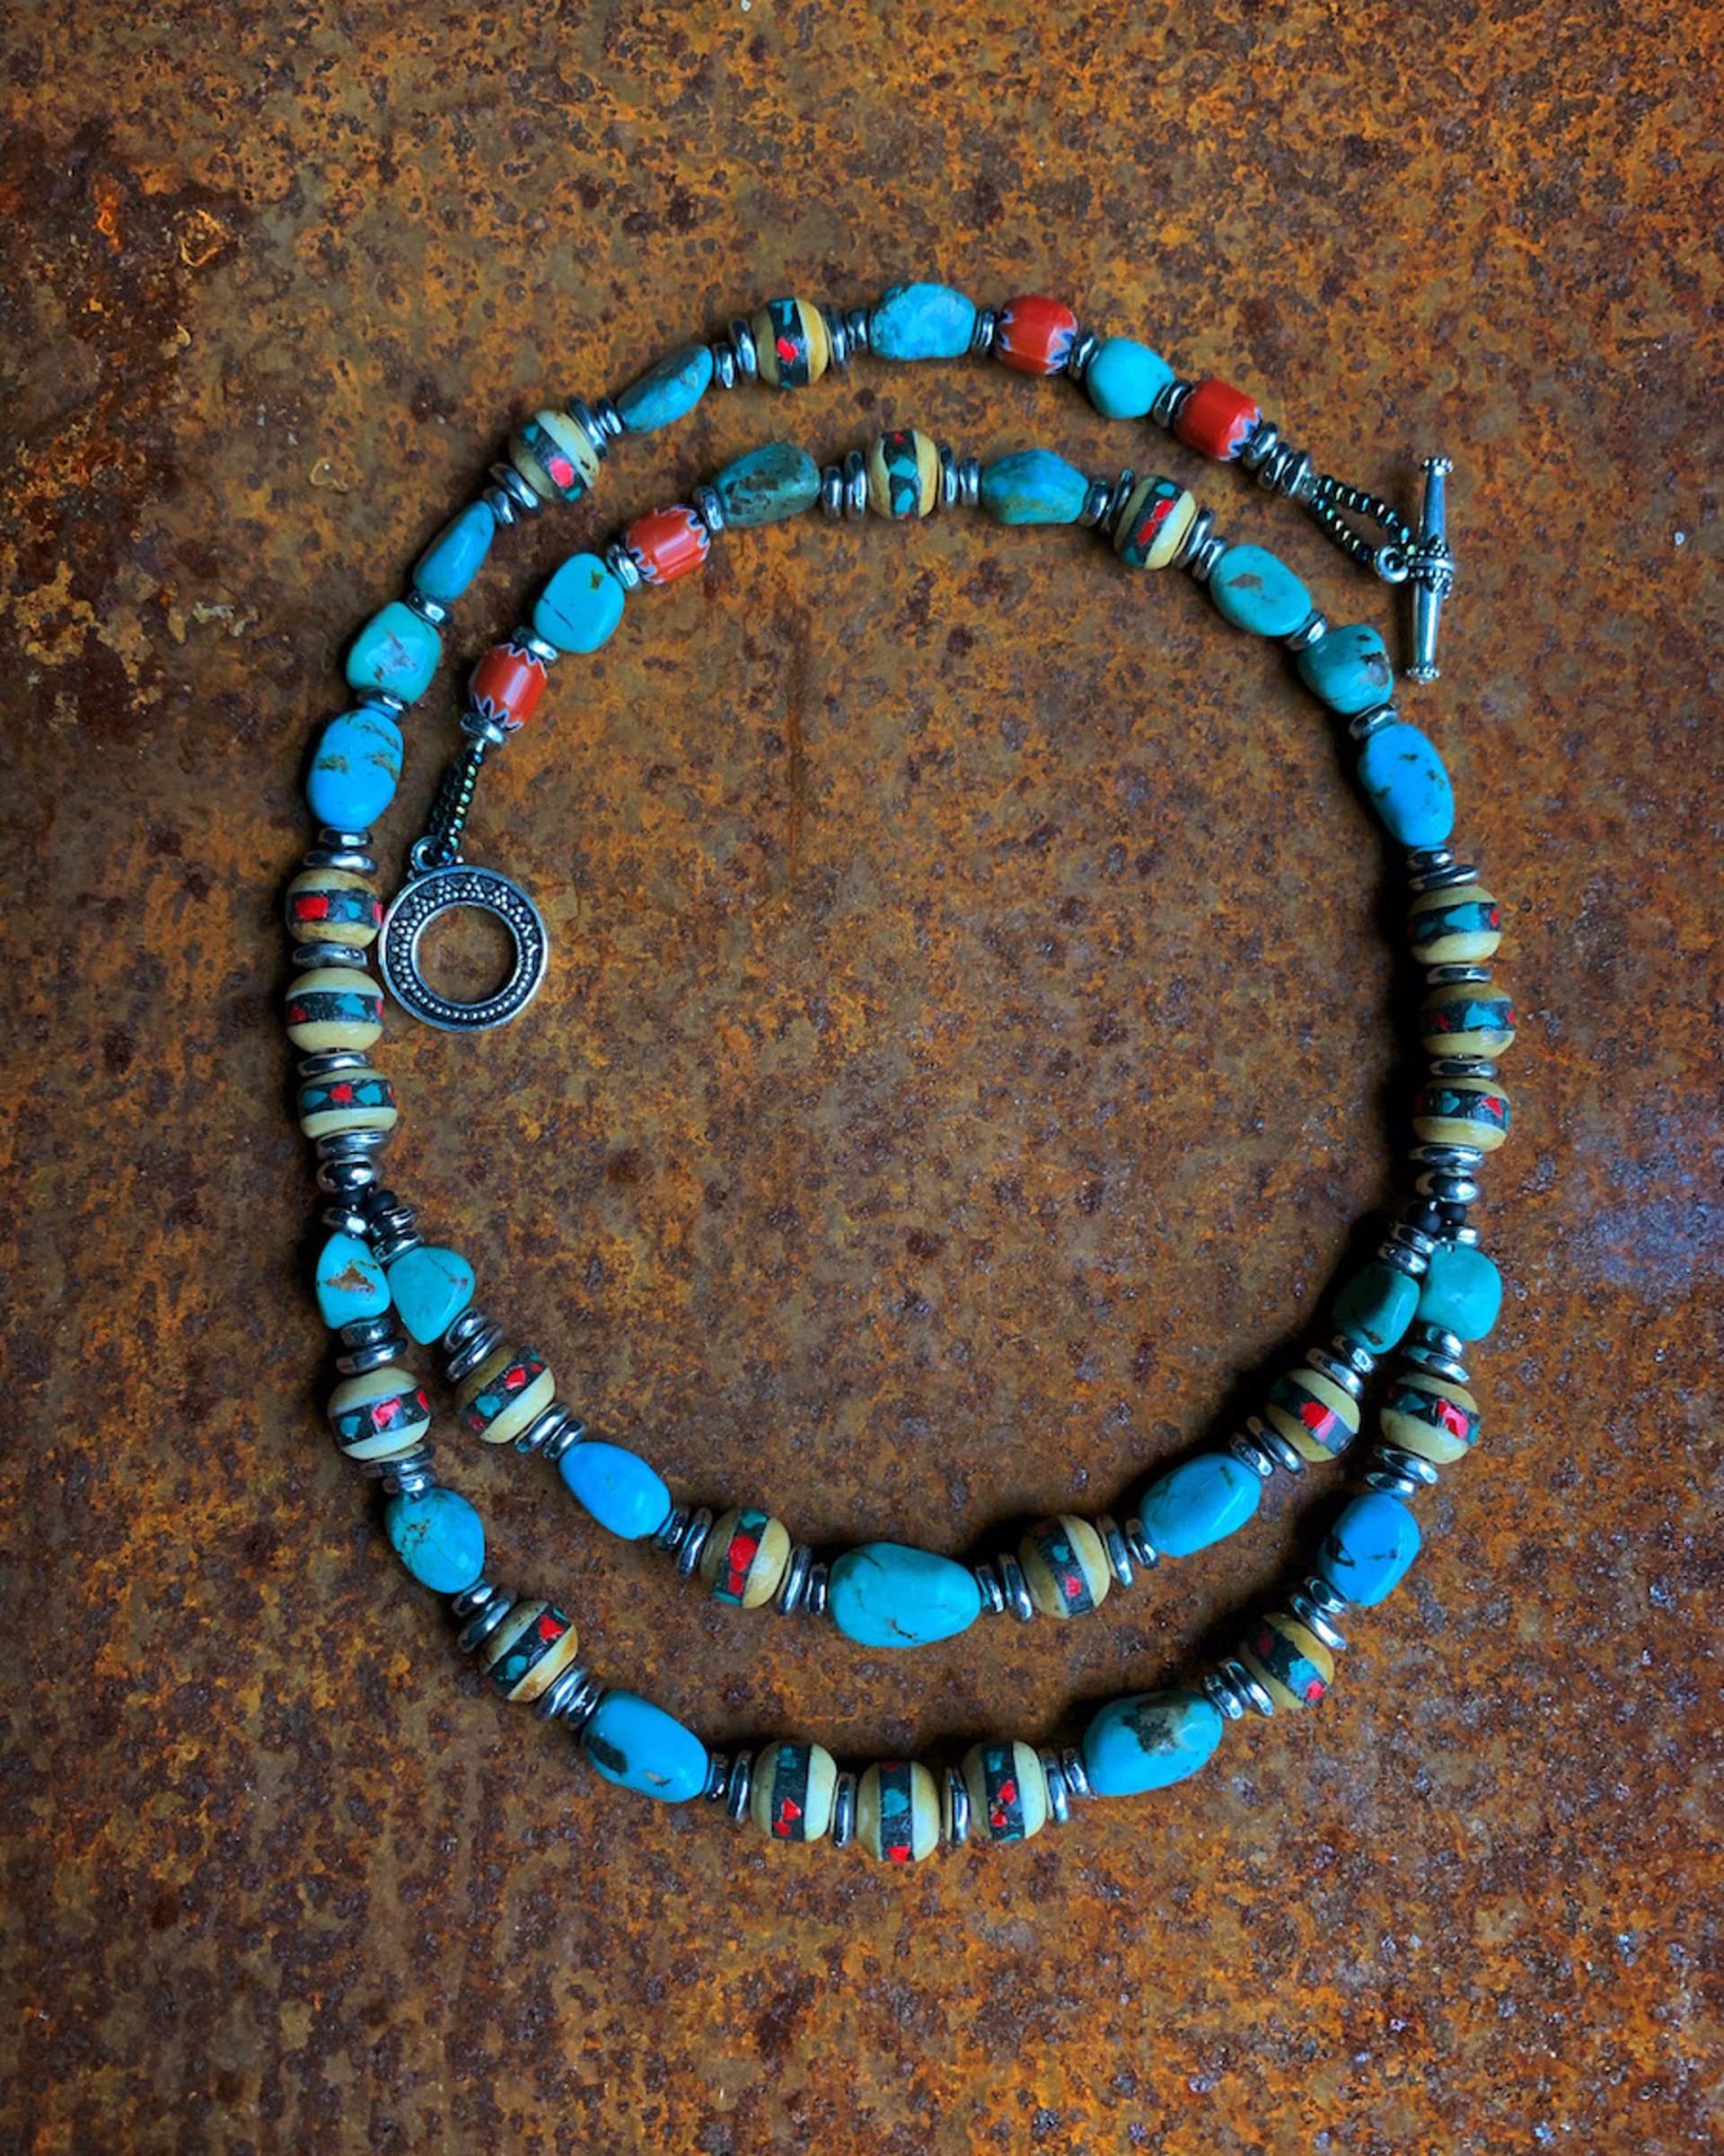 K700 Turquoise and Inlaid Tibetan Yak Bone Beads by Kelly Ormsby